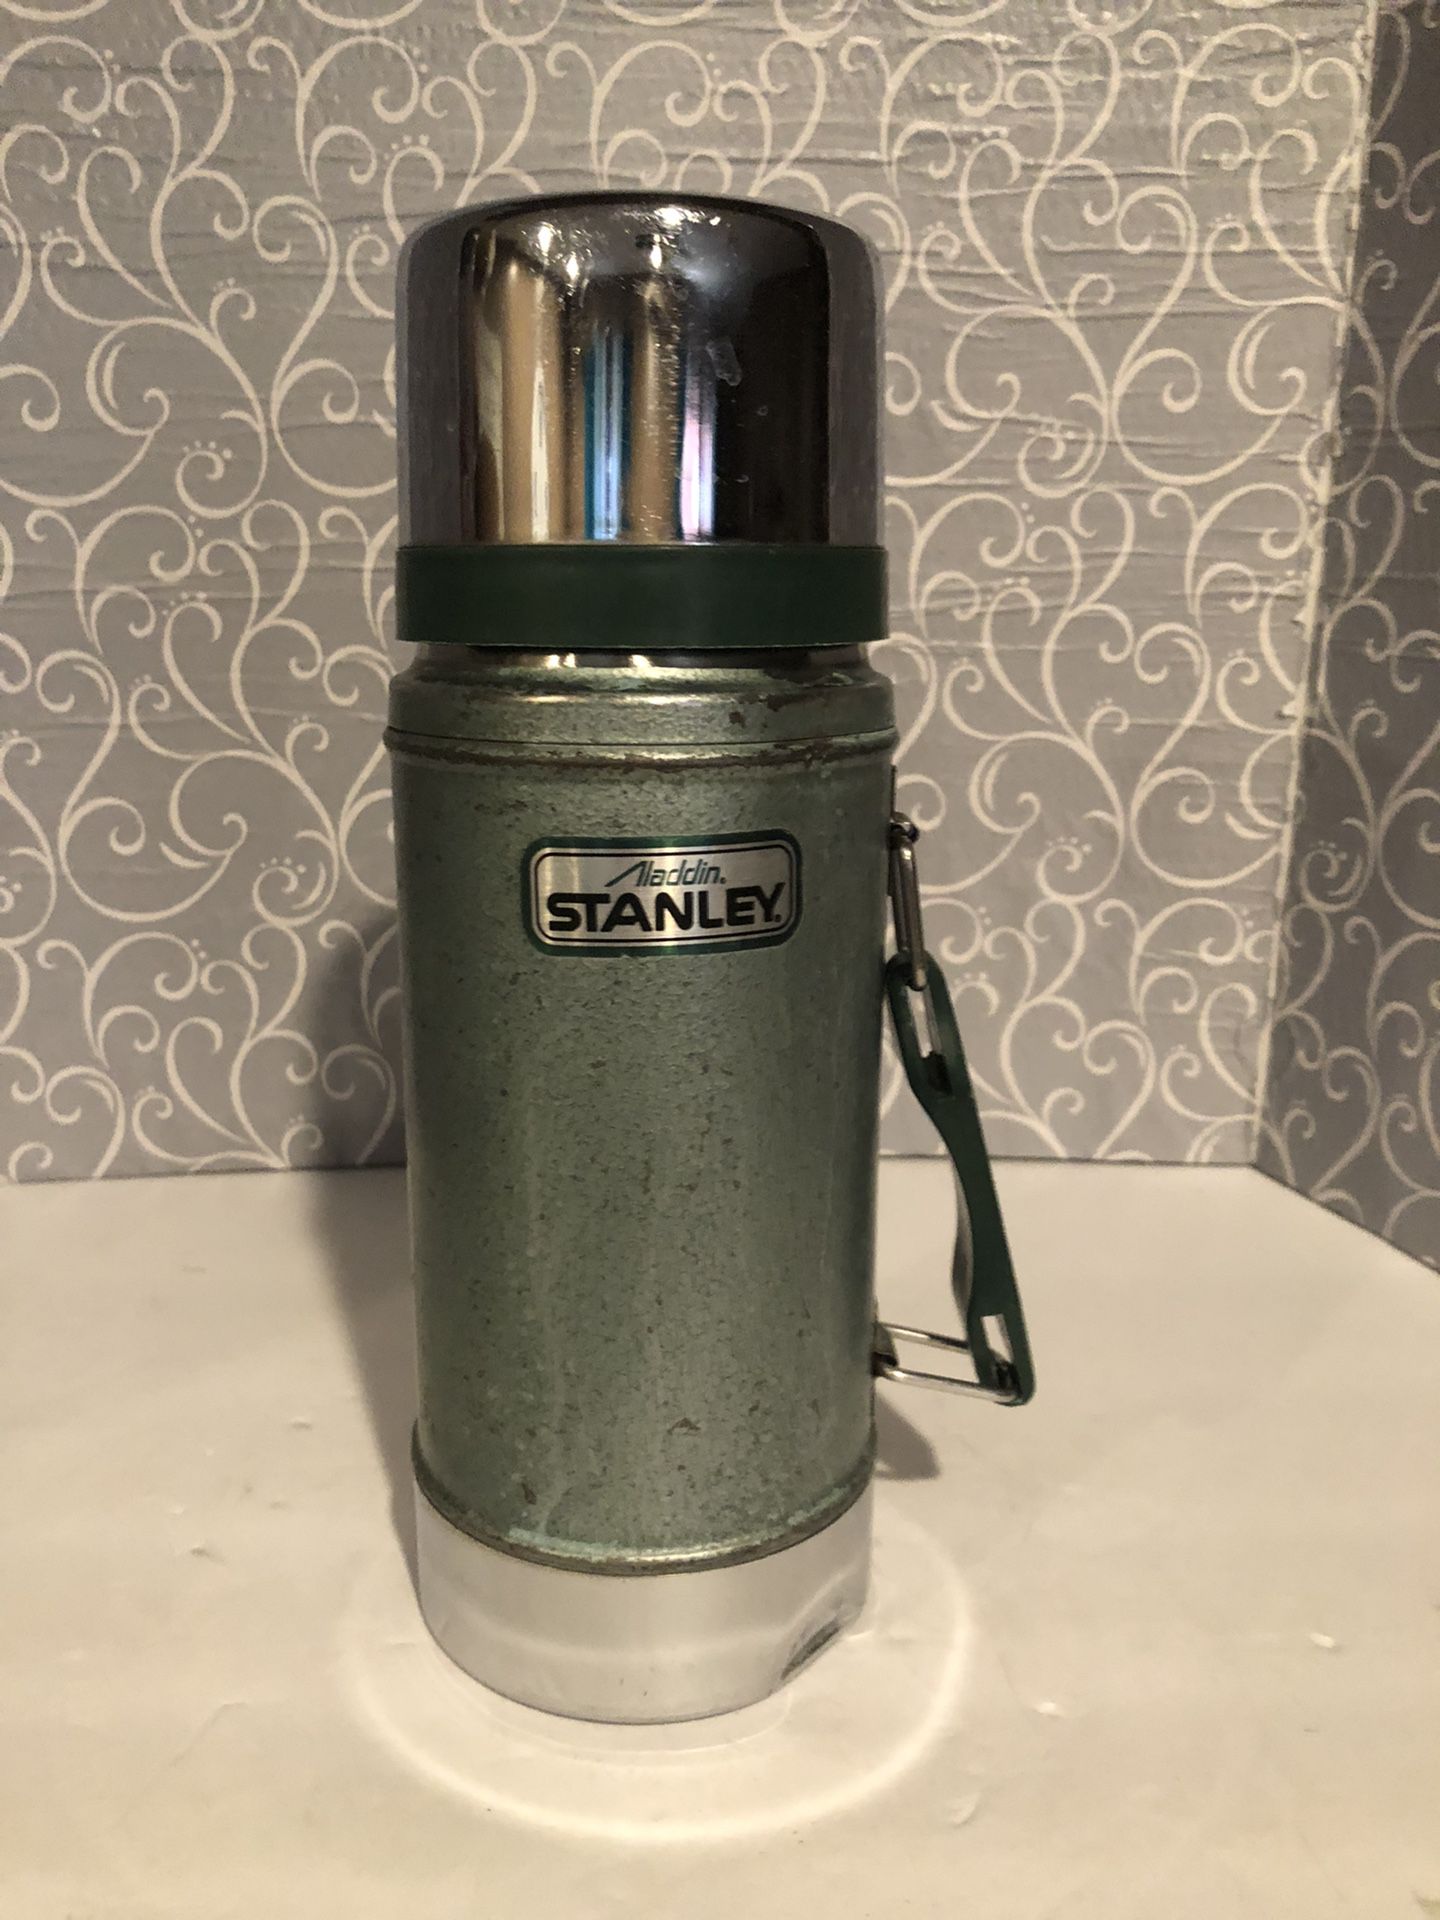 Vintage Stanley thermos for Sale in Goodyear, AZ - OfferUp